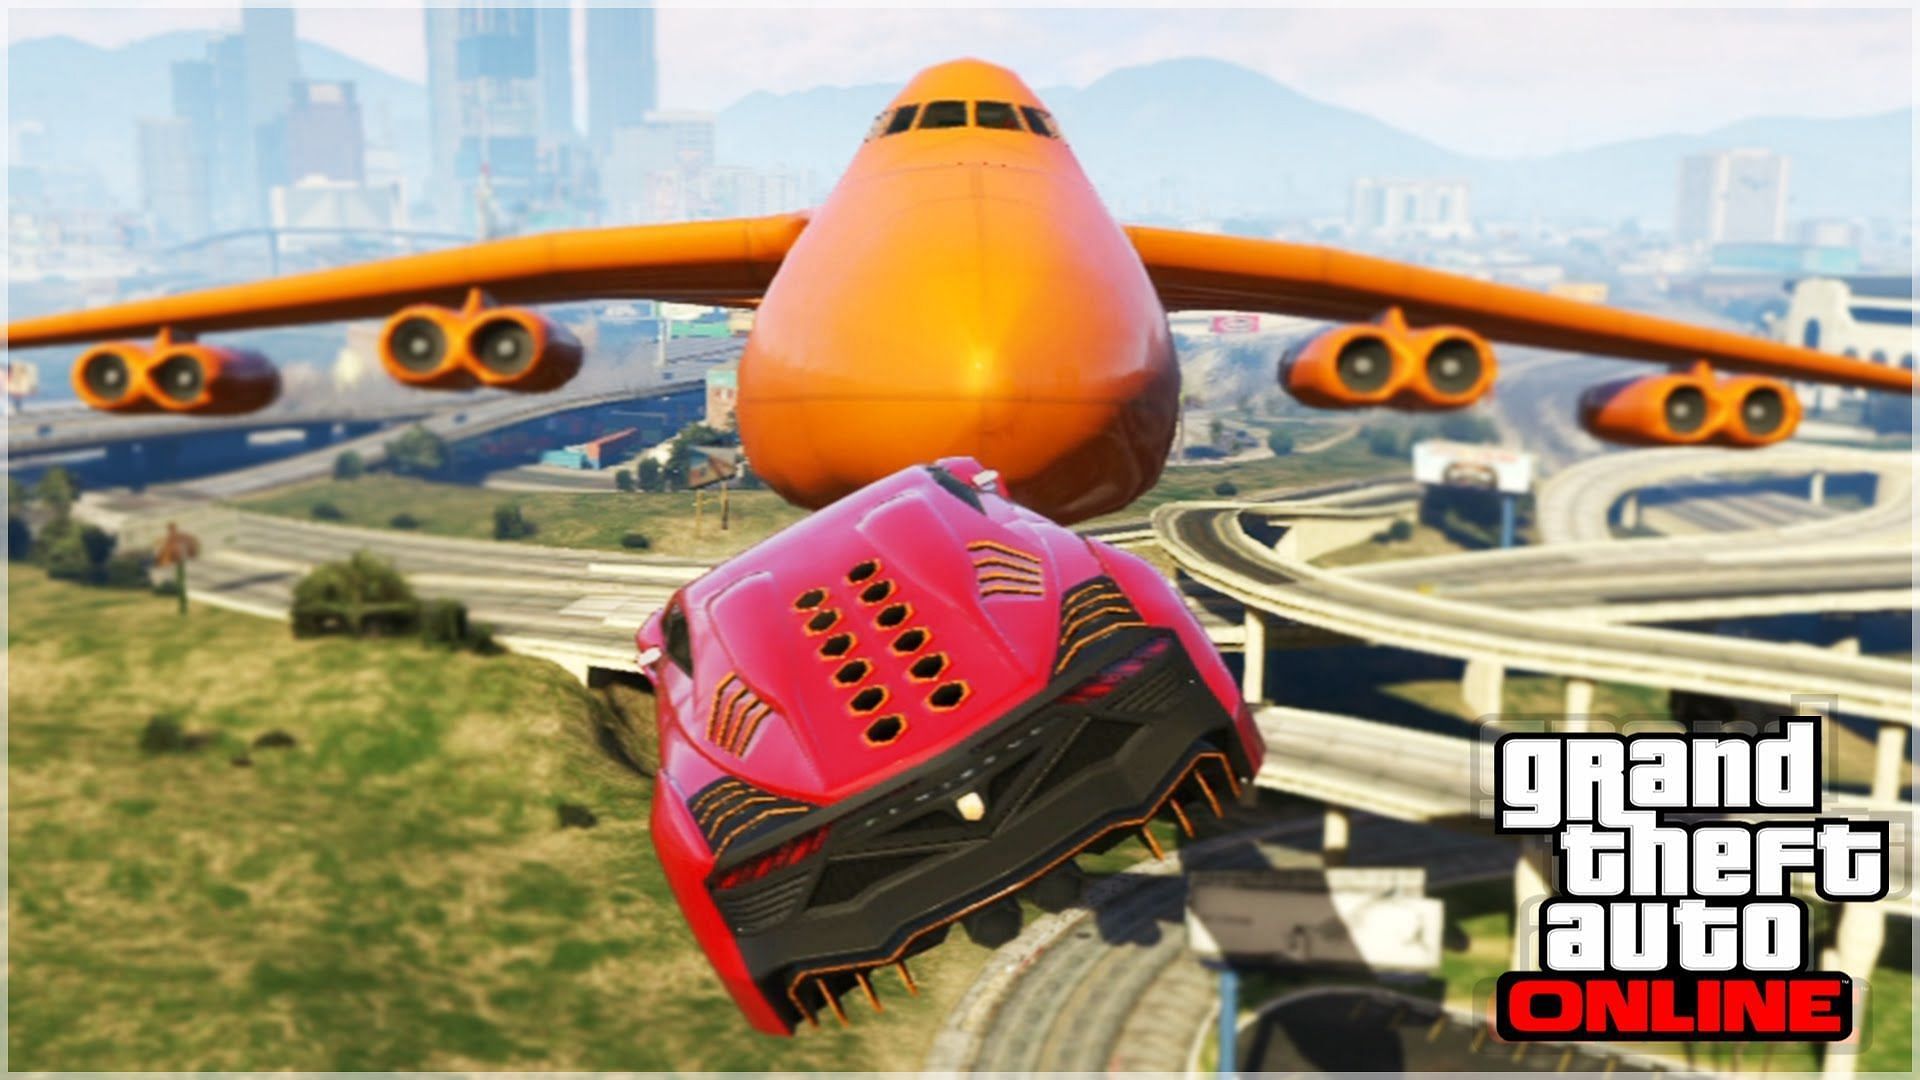 5 best GTA Online memes and funny moments in 2022